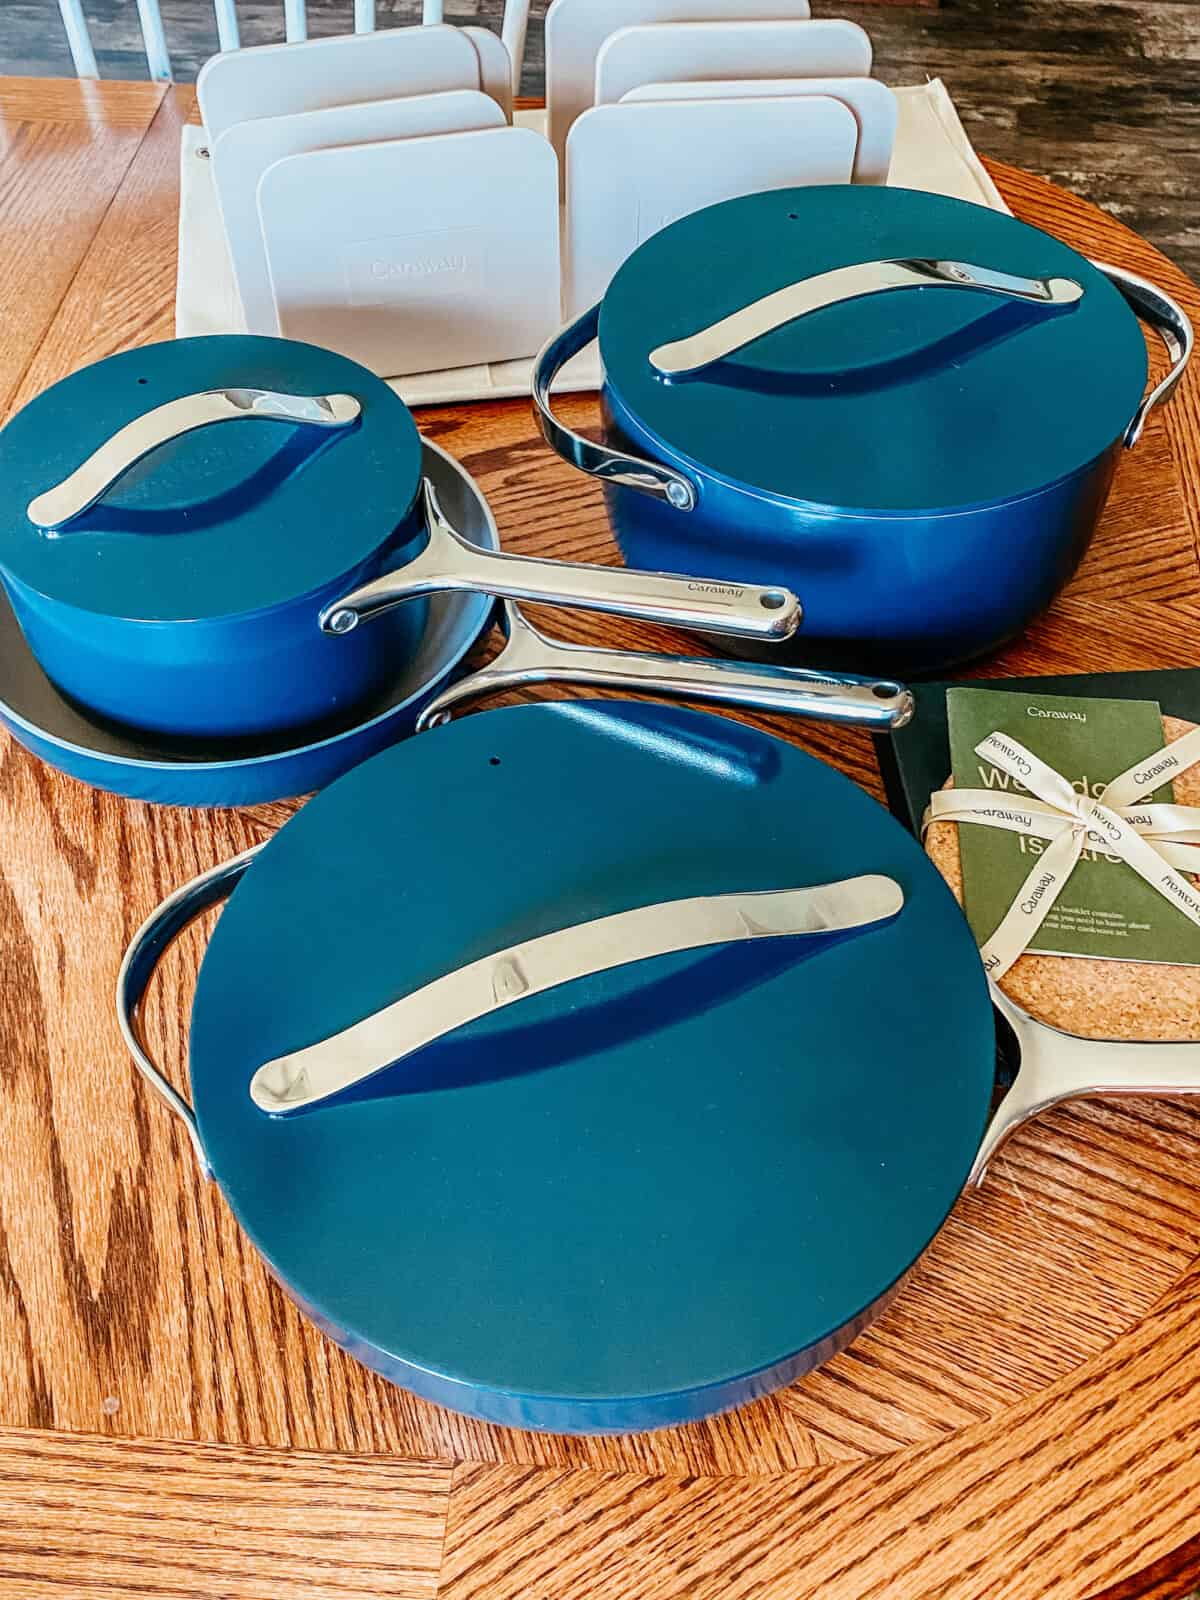 Caraway Cookware Review — is it Worth the Hype? (my honest thoughts) -  Boots & Hooves Homestead